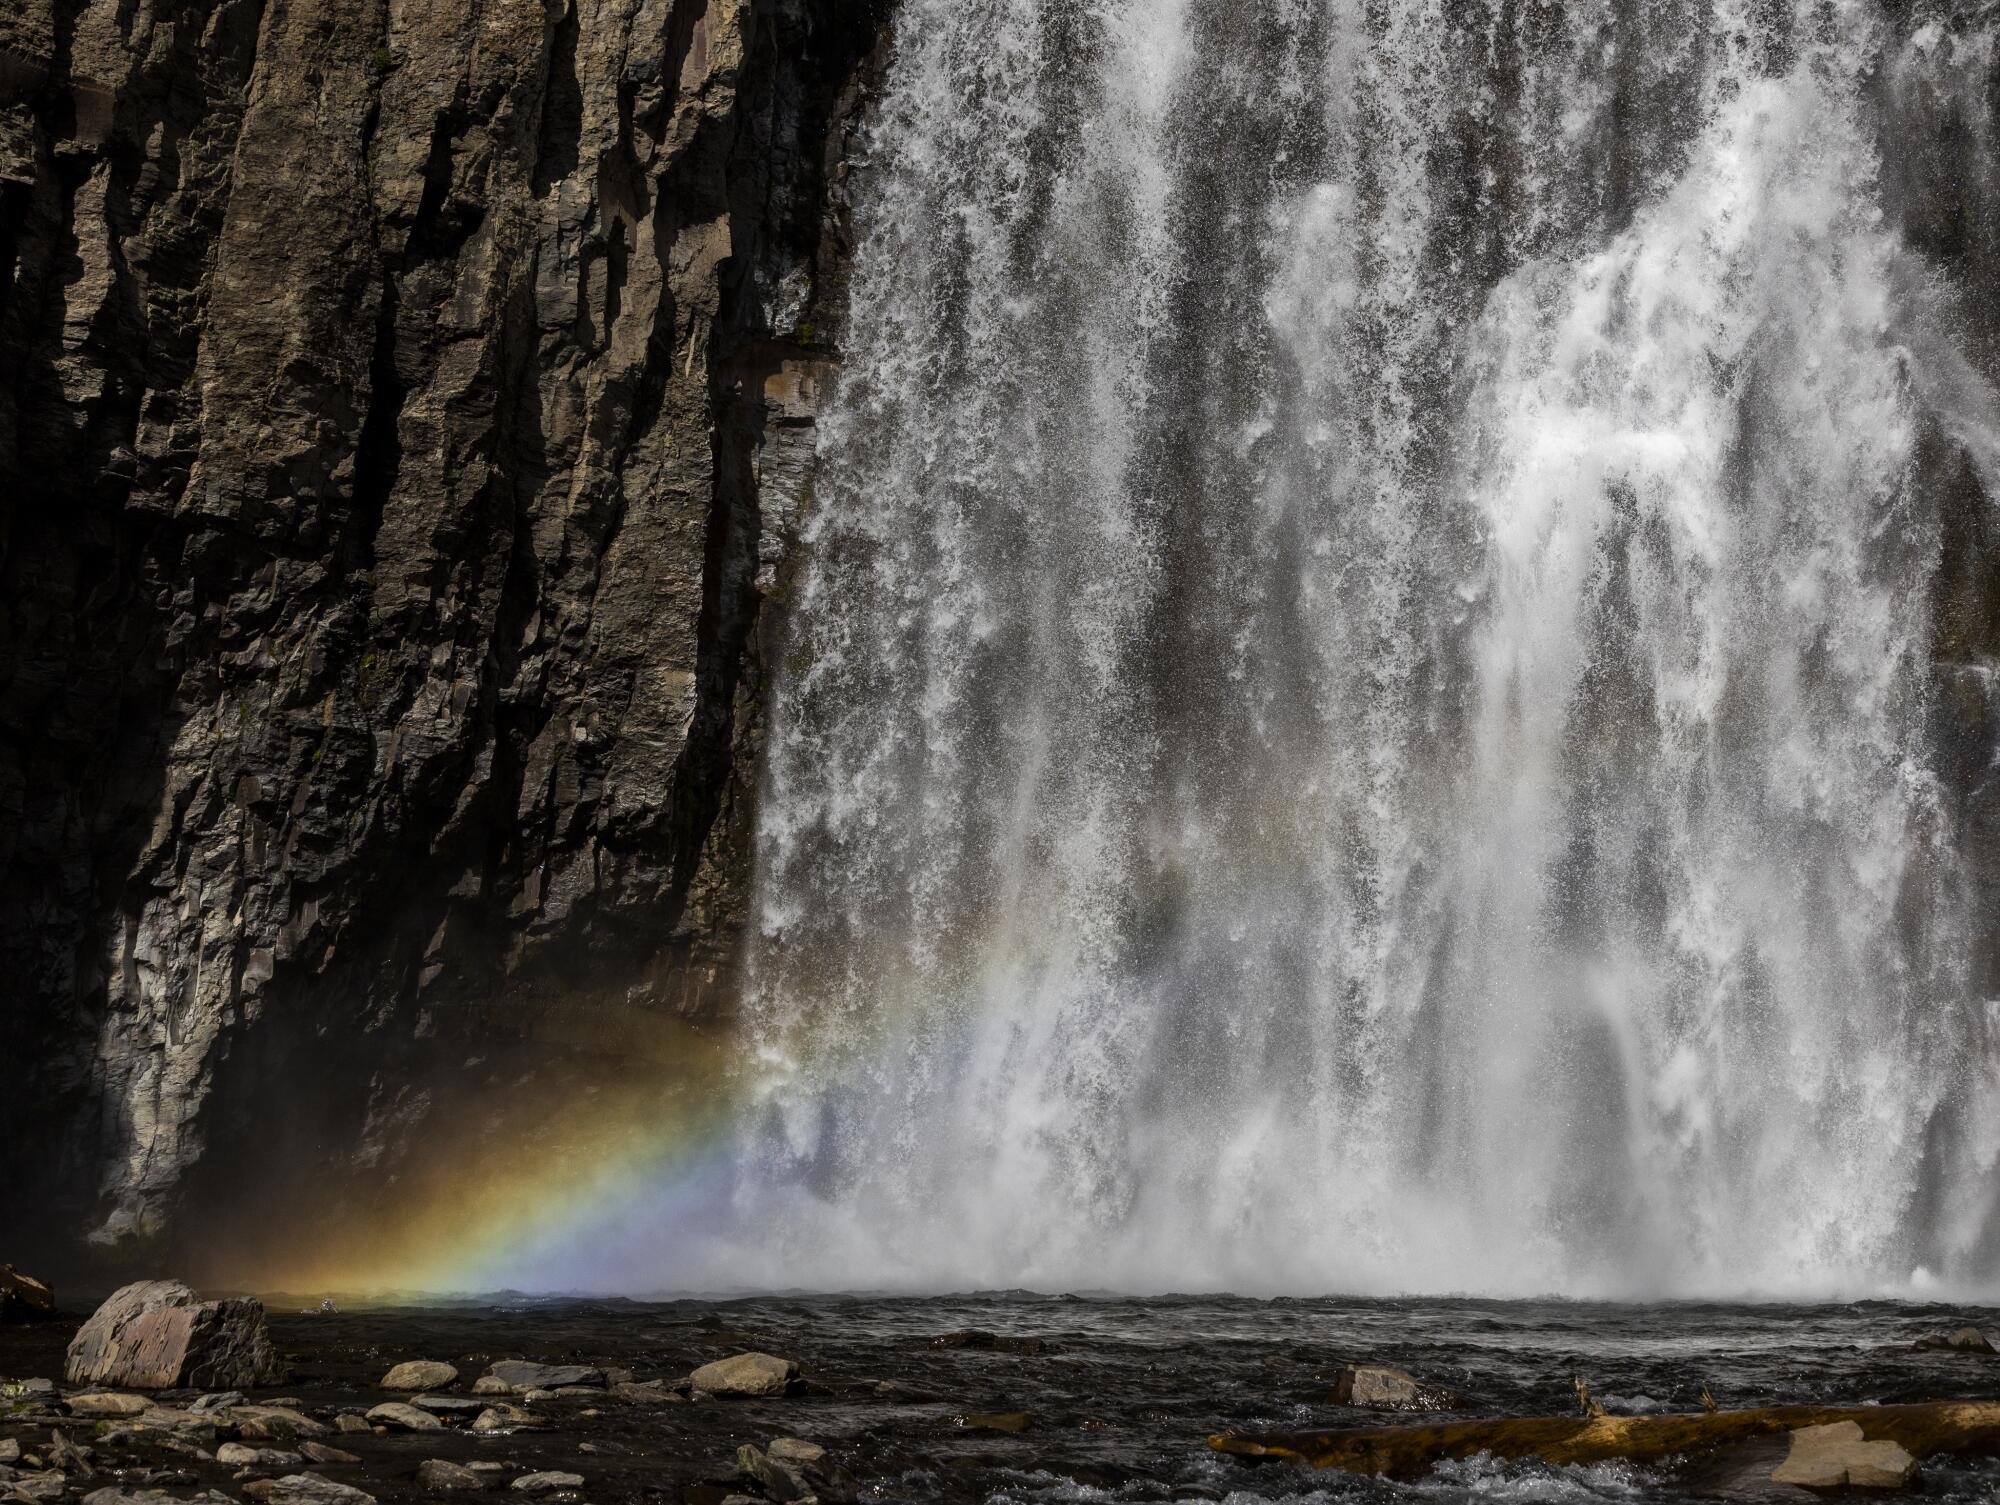 A rainbow at the base of a tumbling waterfall.